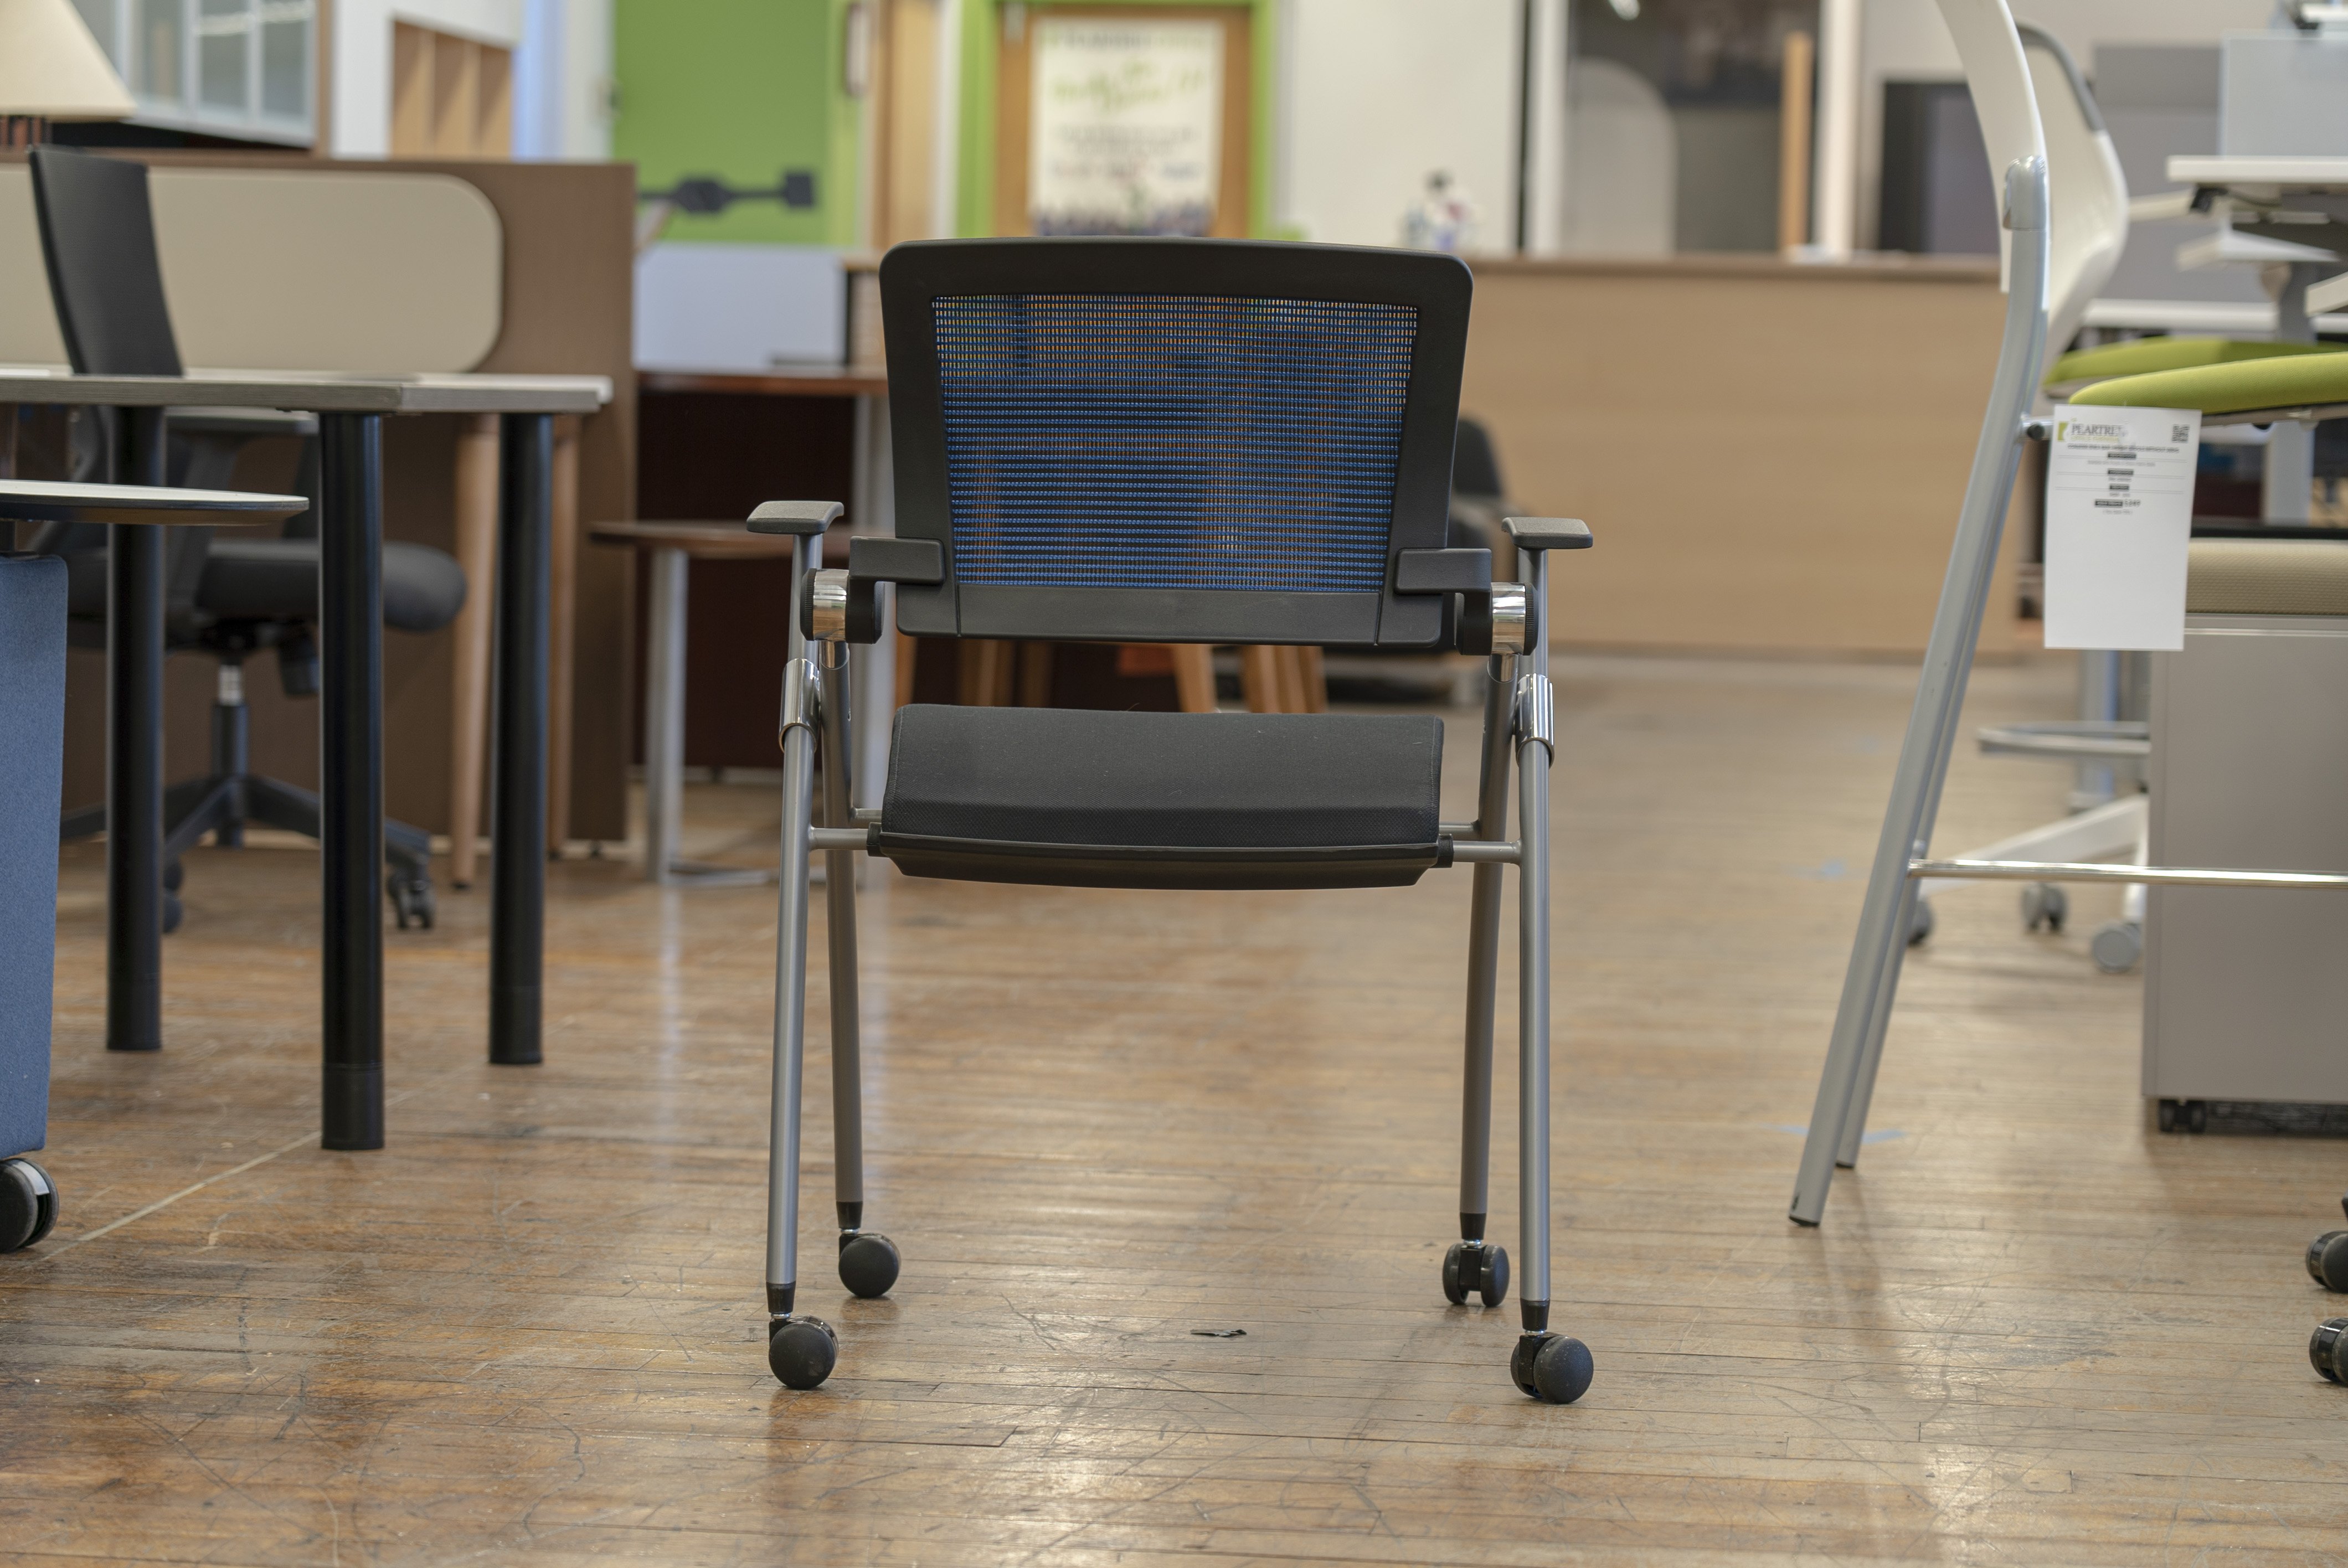 ais-stow-multipurpose-nesting-chairs